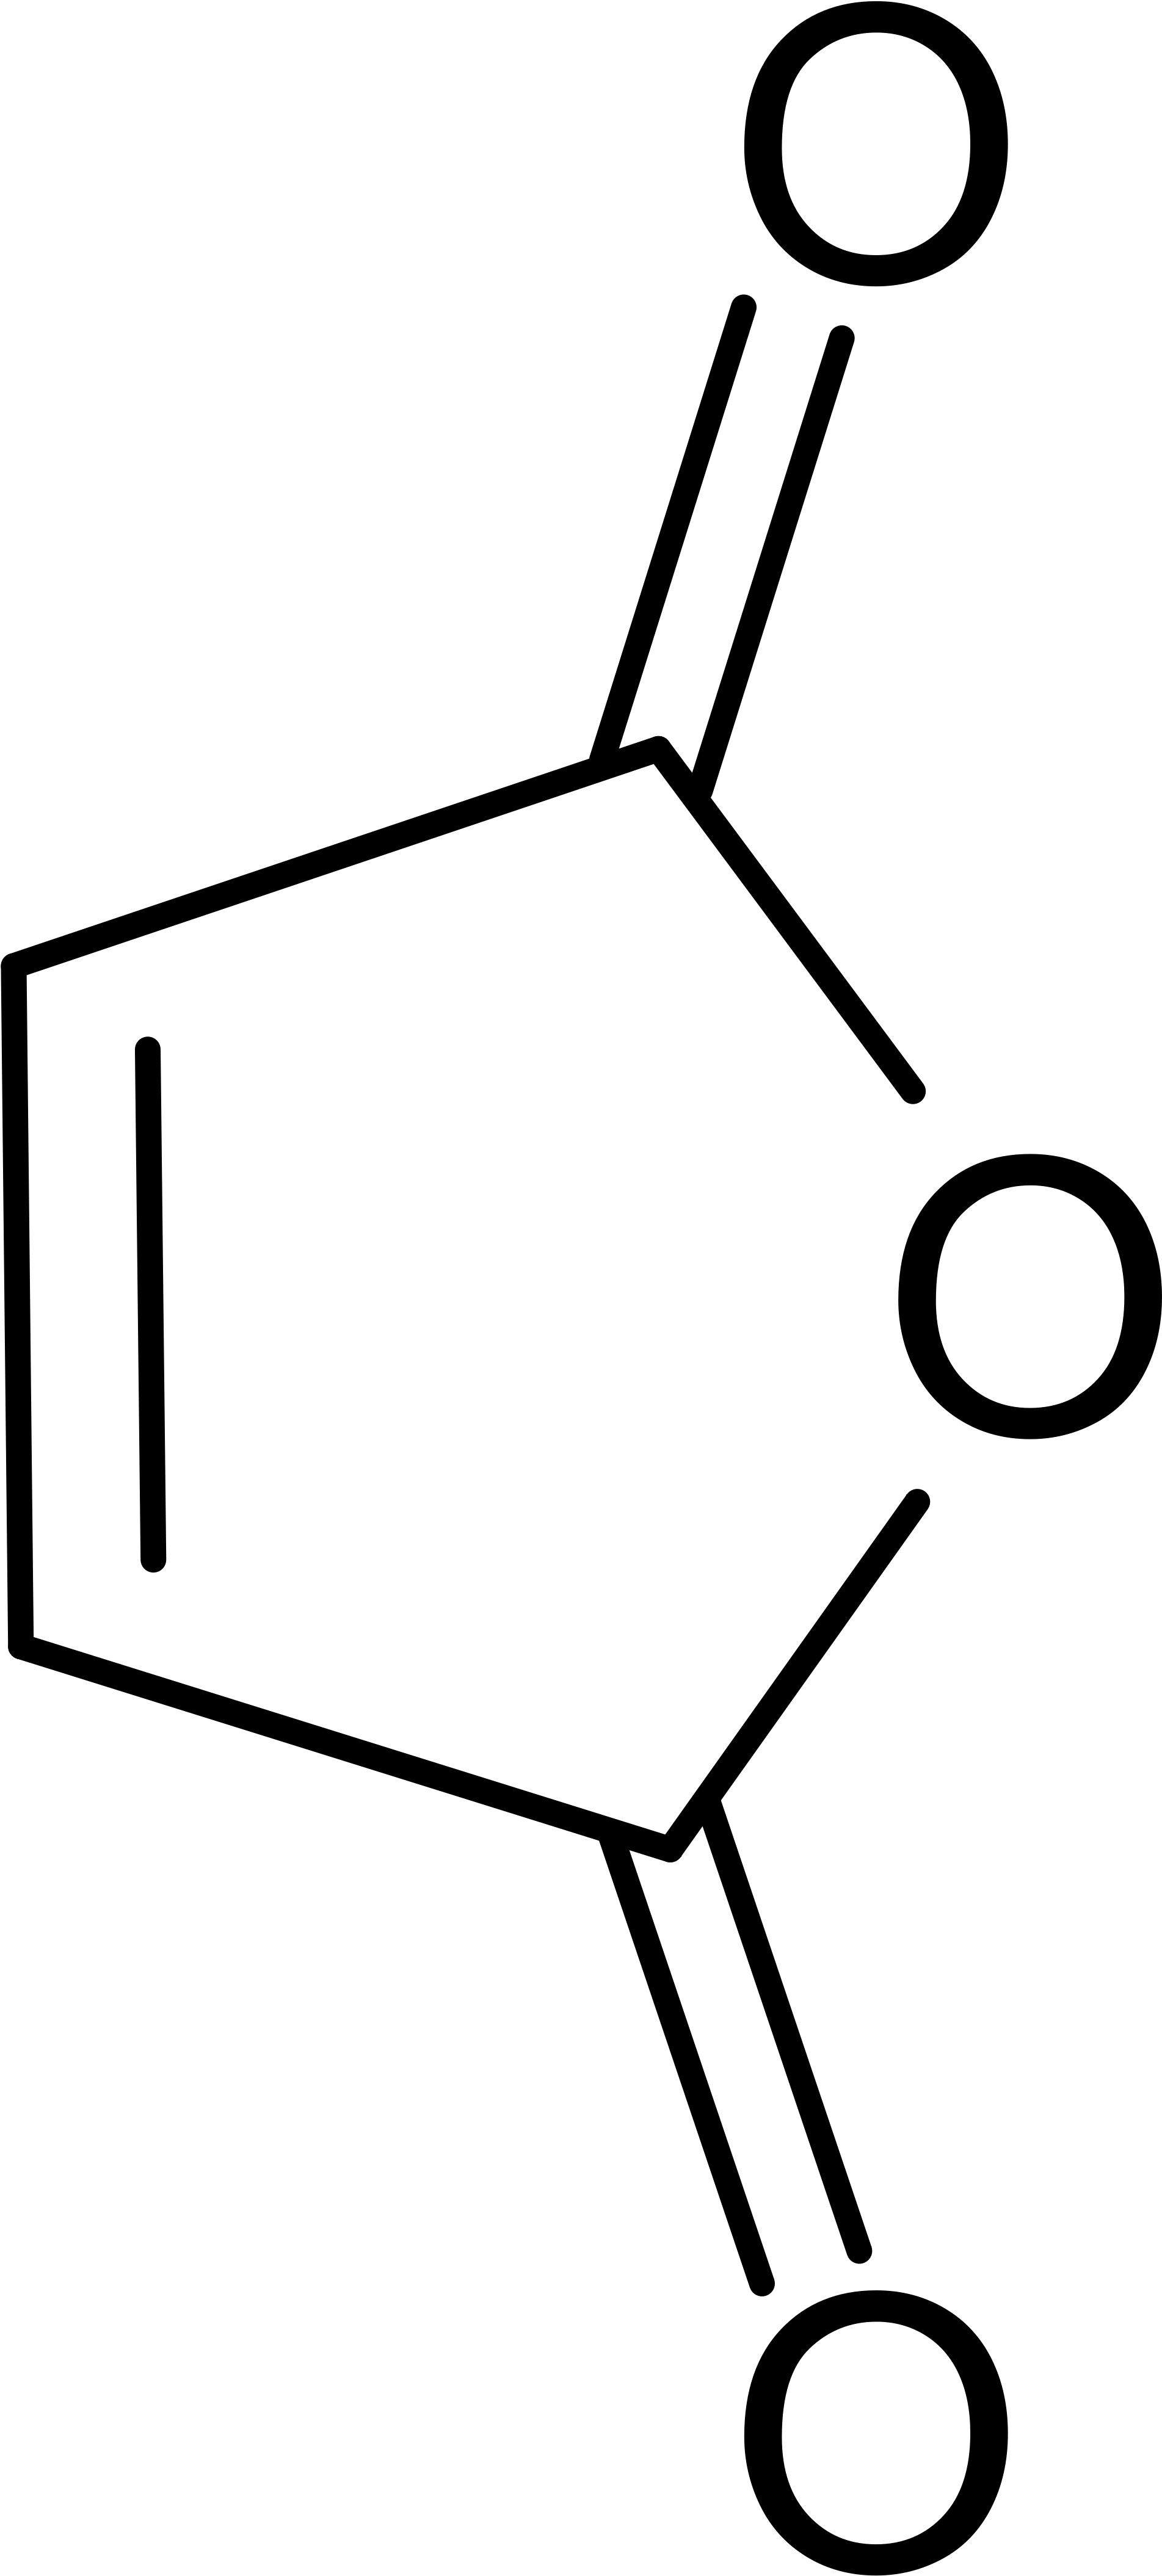 Open - Maleic Anhydride Molecular Weight (2000x4342)